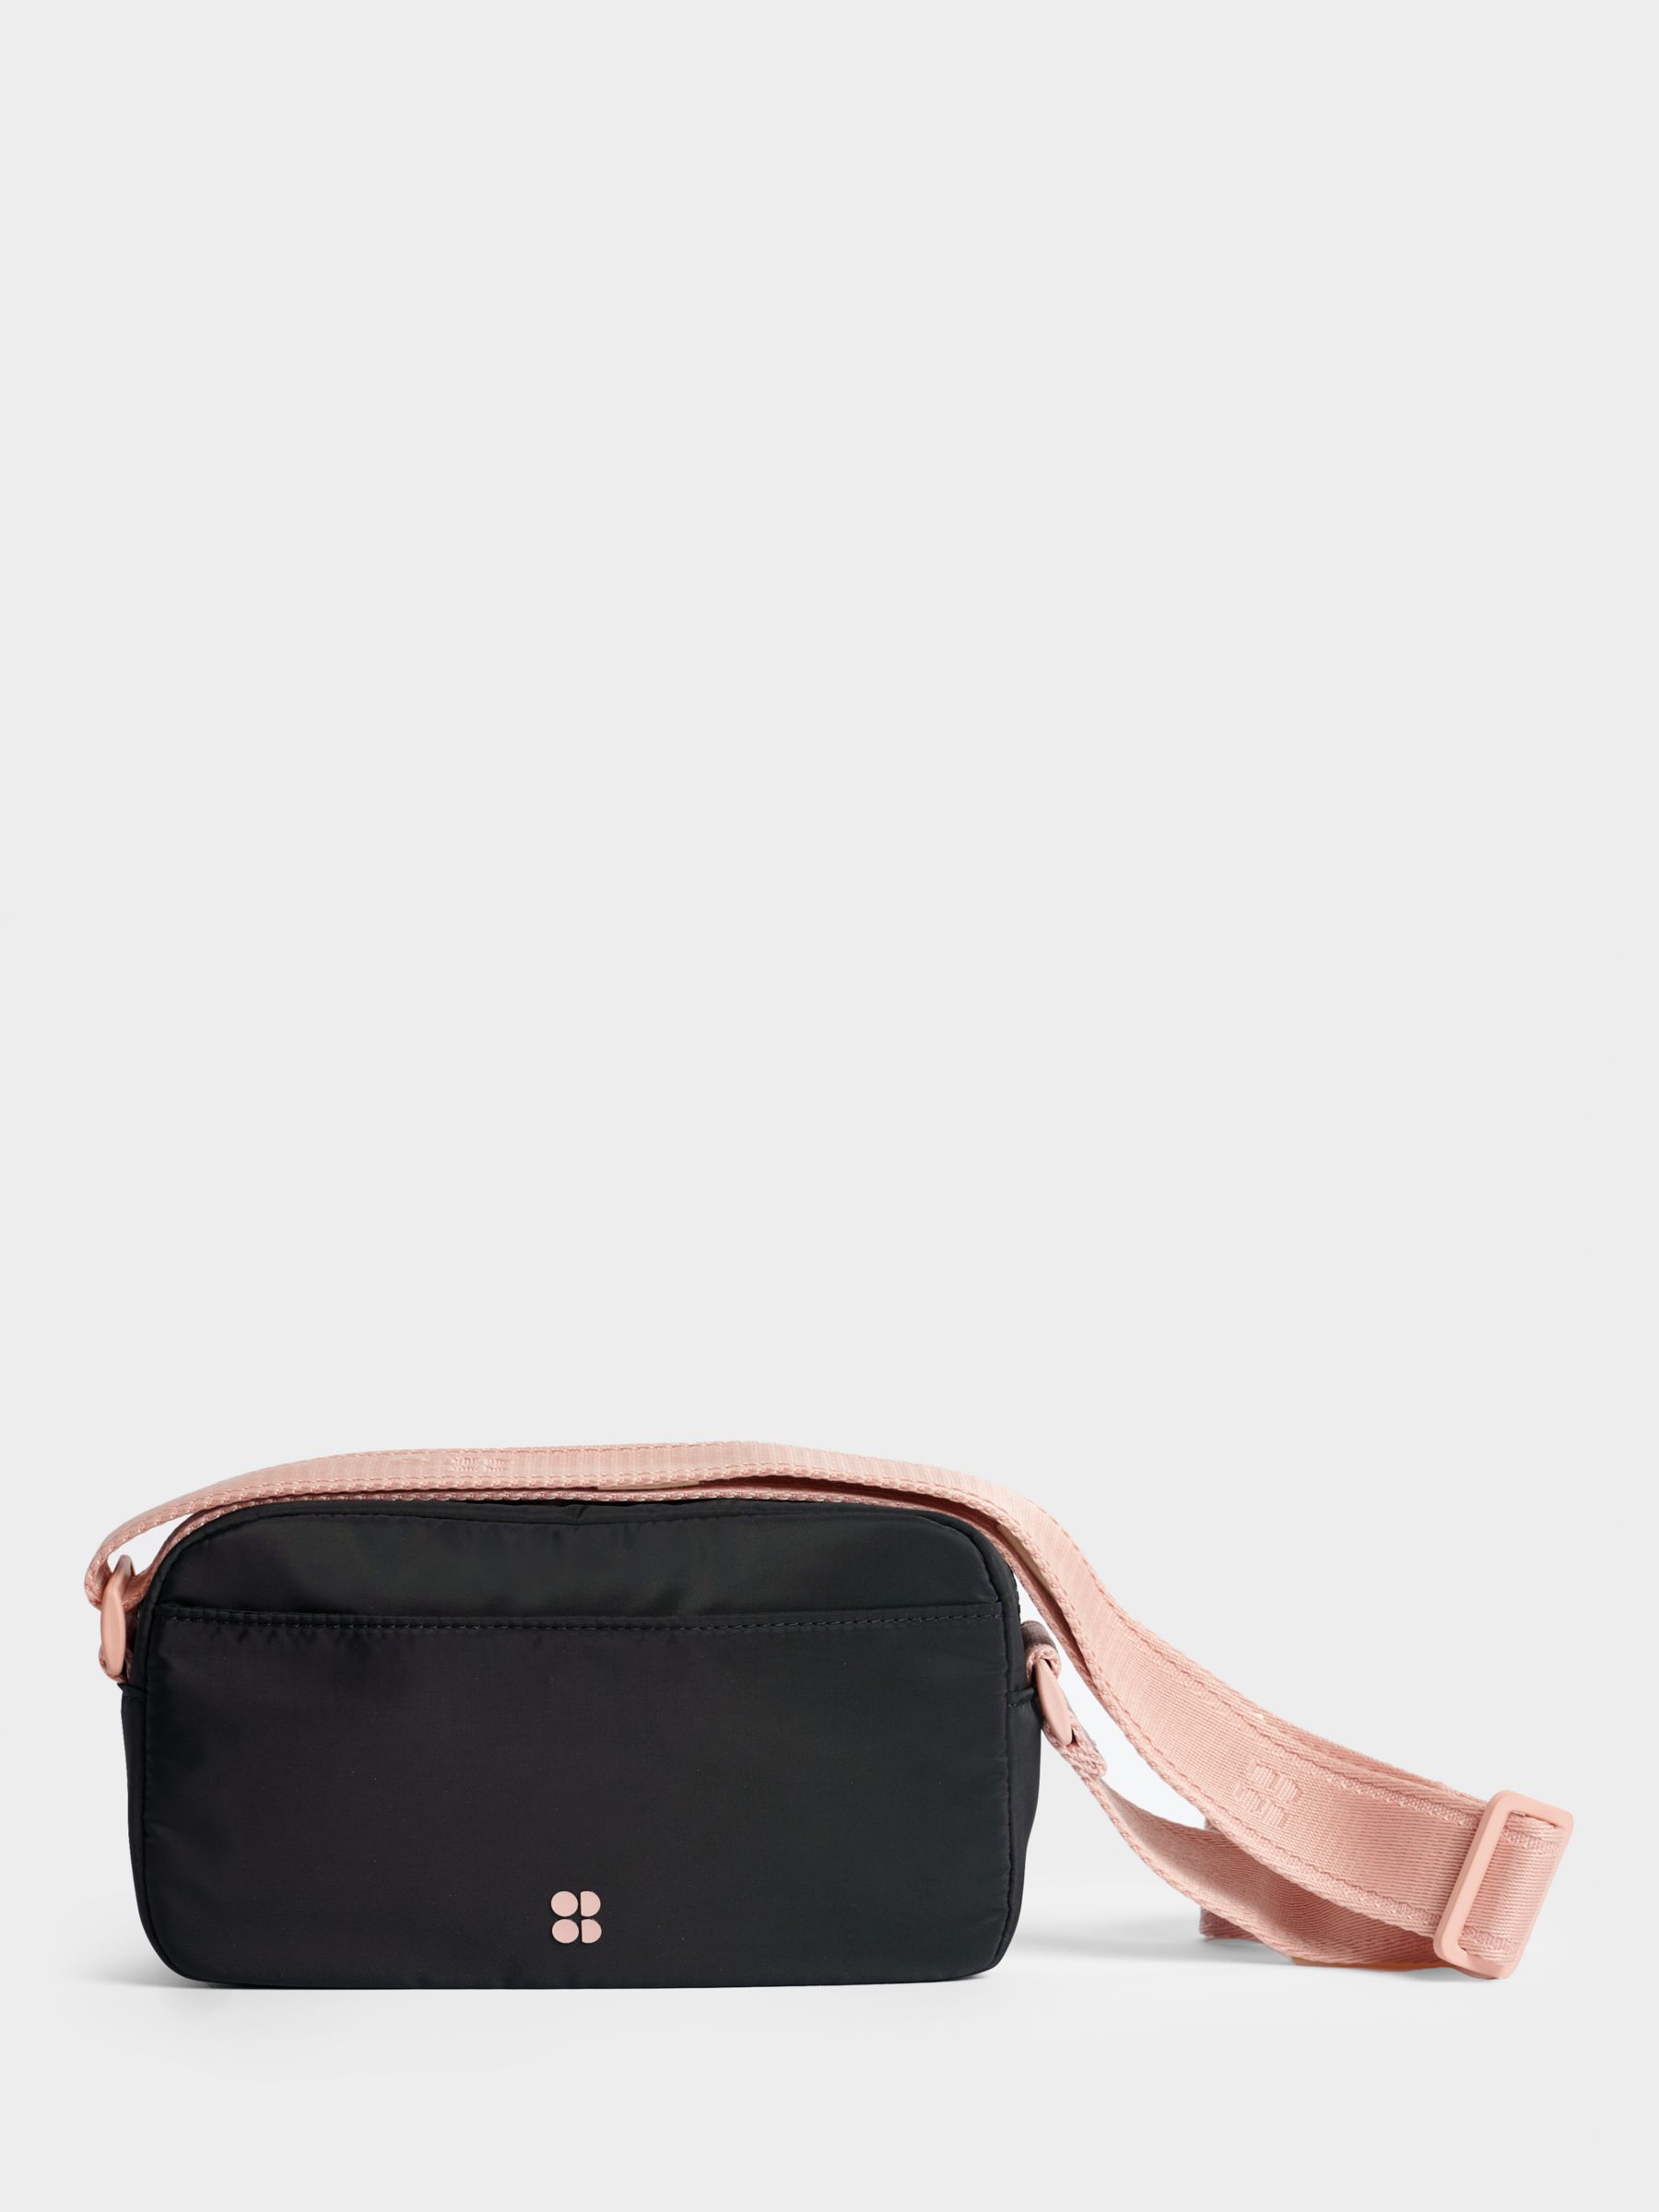 Buy Sweaty Betty All Day Cross Body Bag Online at johnlewis.com